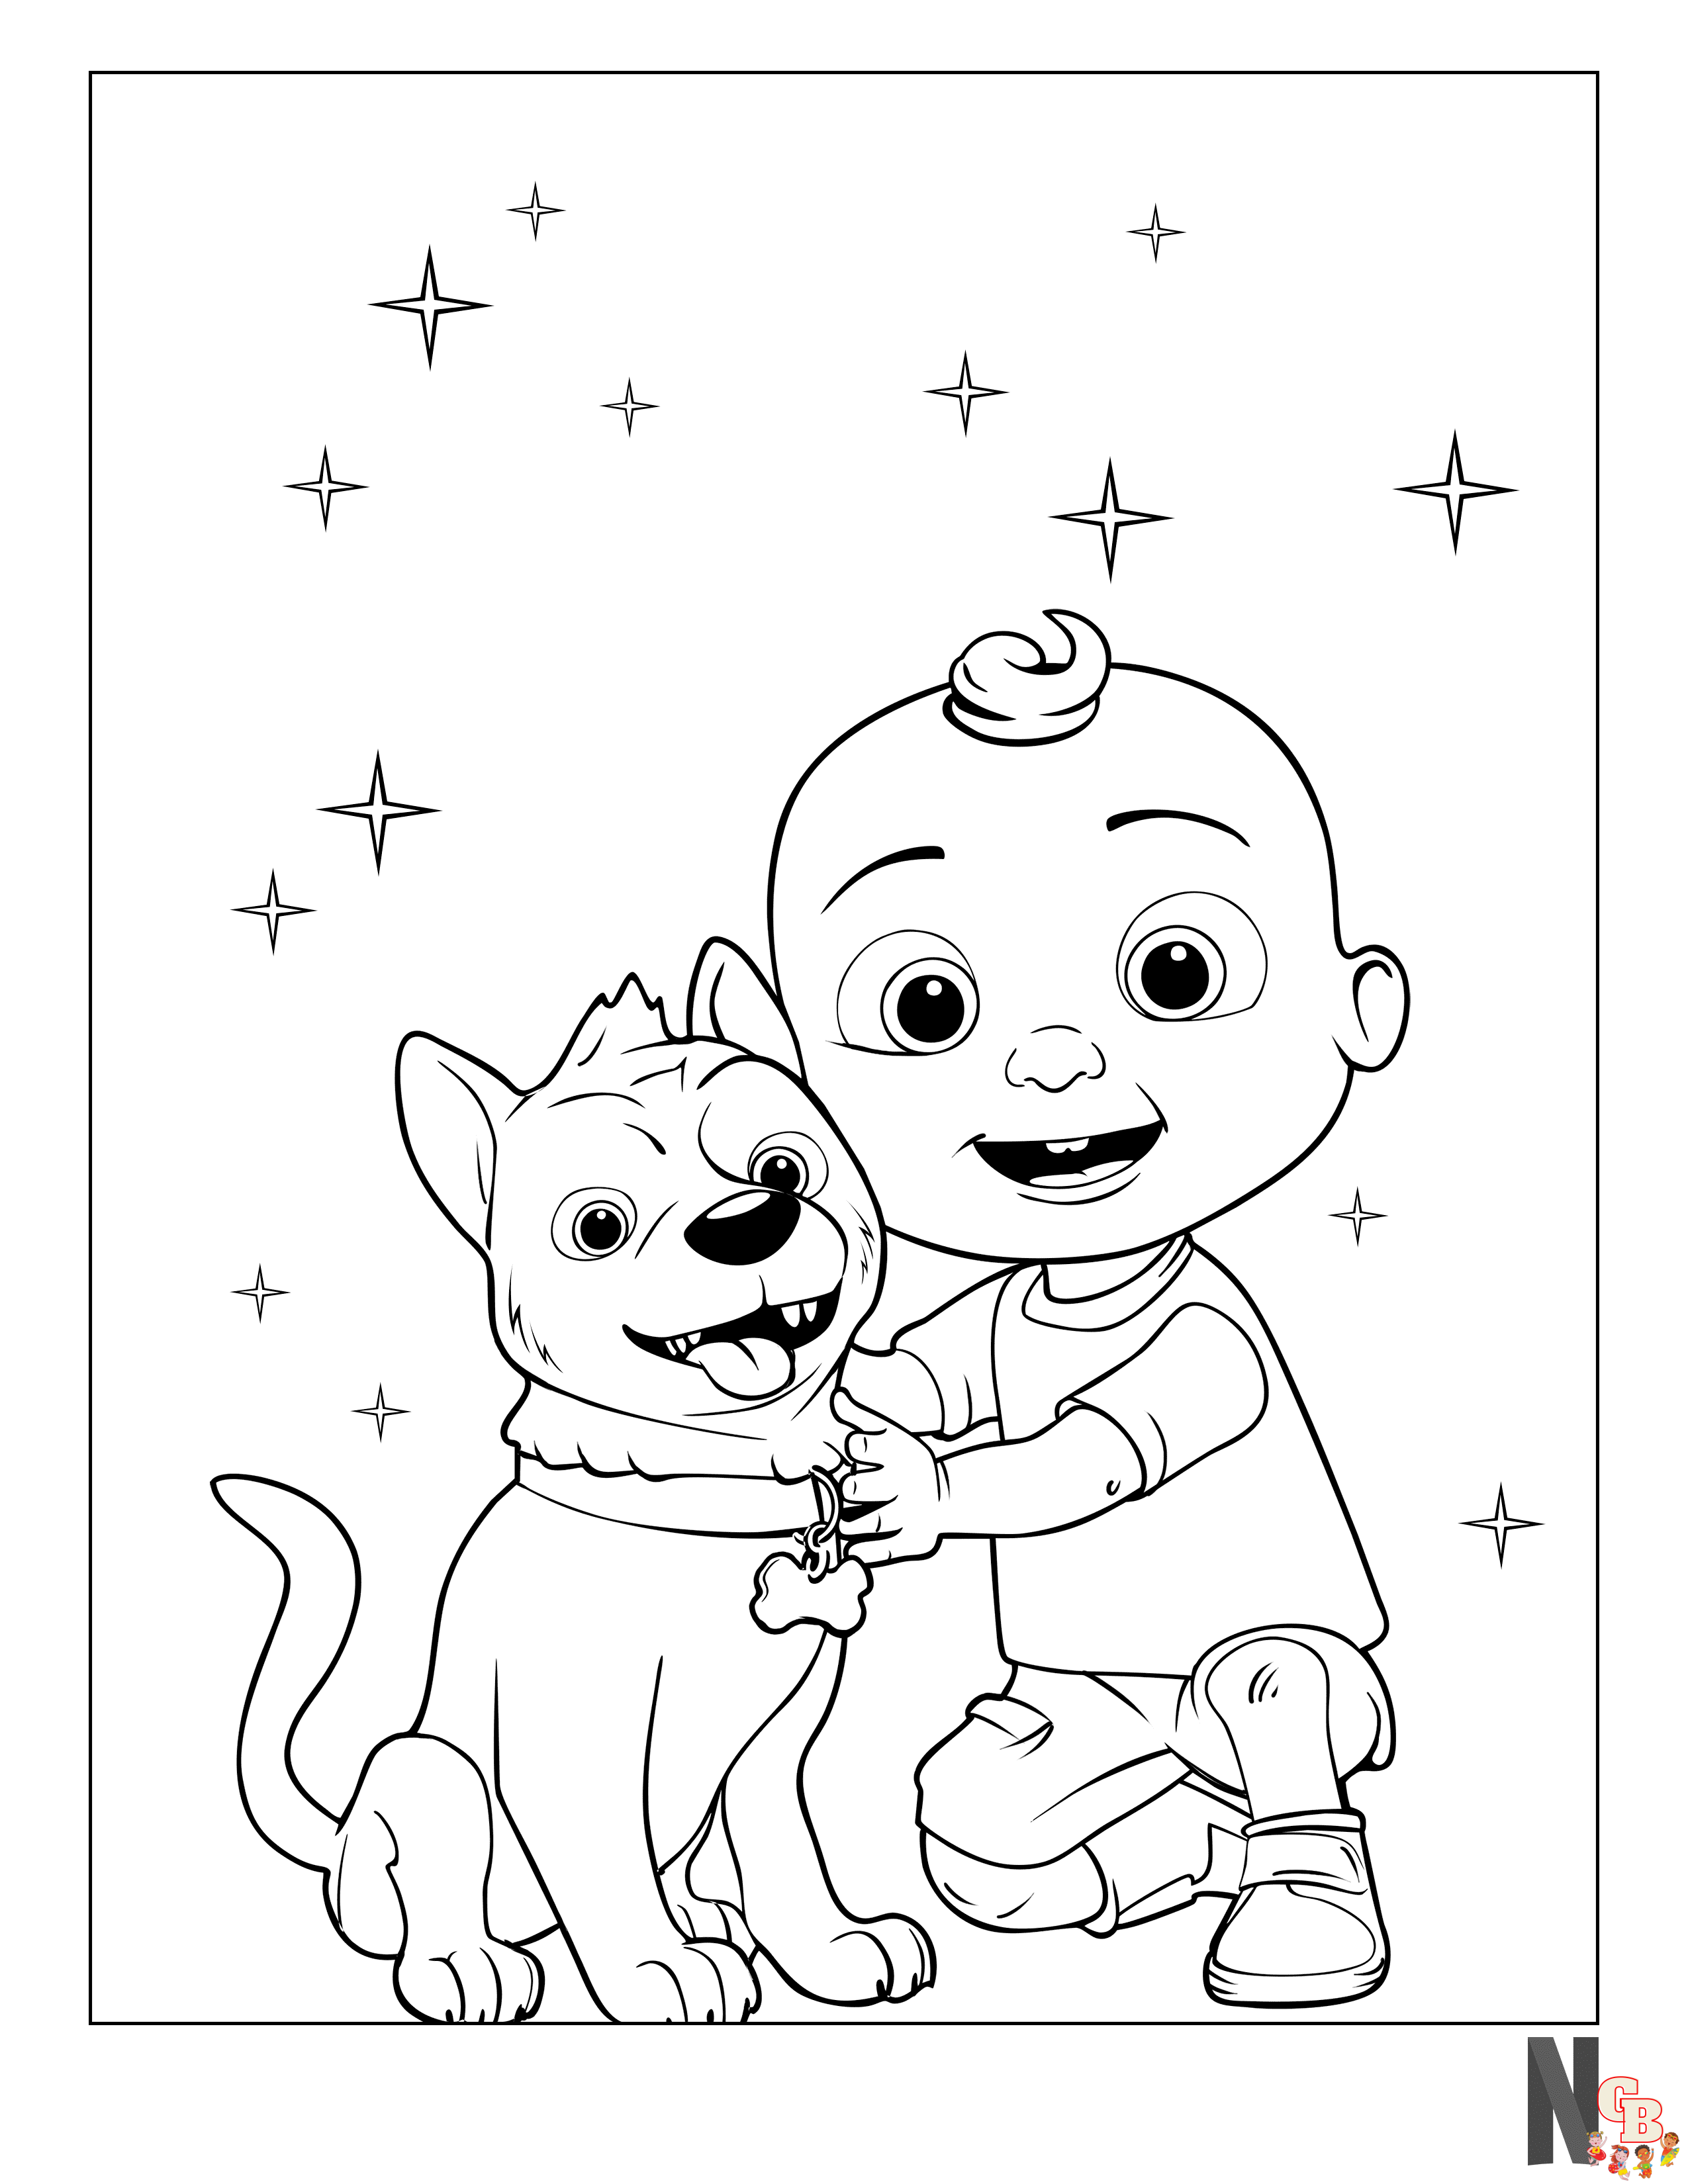 Free Printable Cocomelon Coloring Pages For Kids  Birthday coloring pages,  Coloring pages, Coloring pages for kids